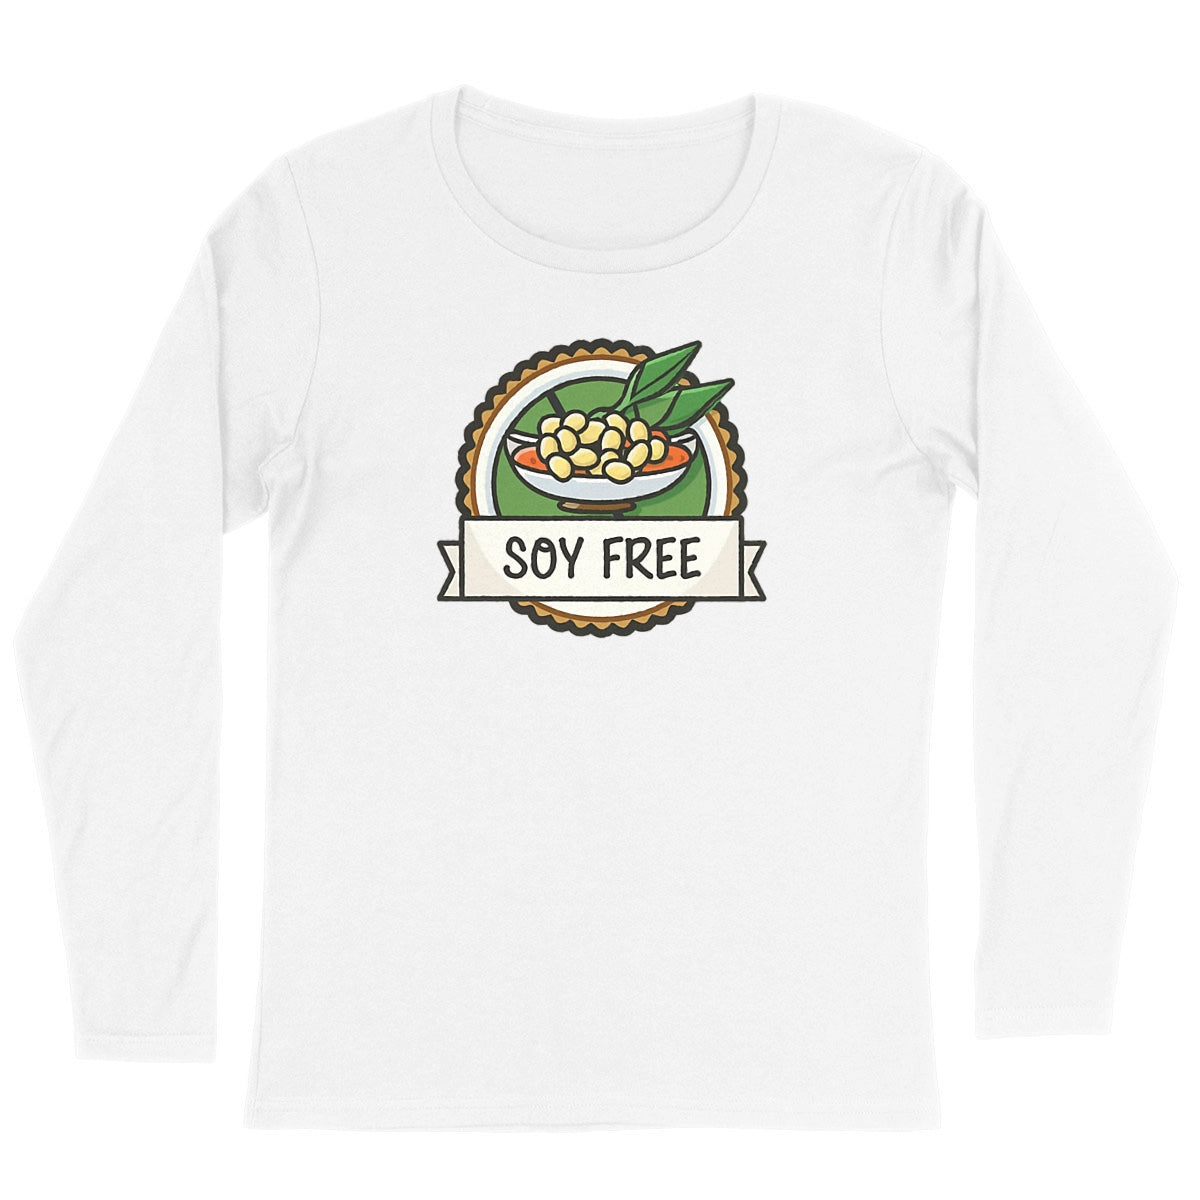 Soy Free Bowl Long Sleeve Organic Cotton Graphic Shirt | Hypoallergenic - Allergy Friendly - Naturally Free